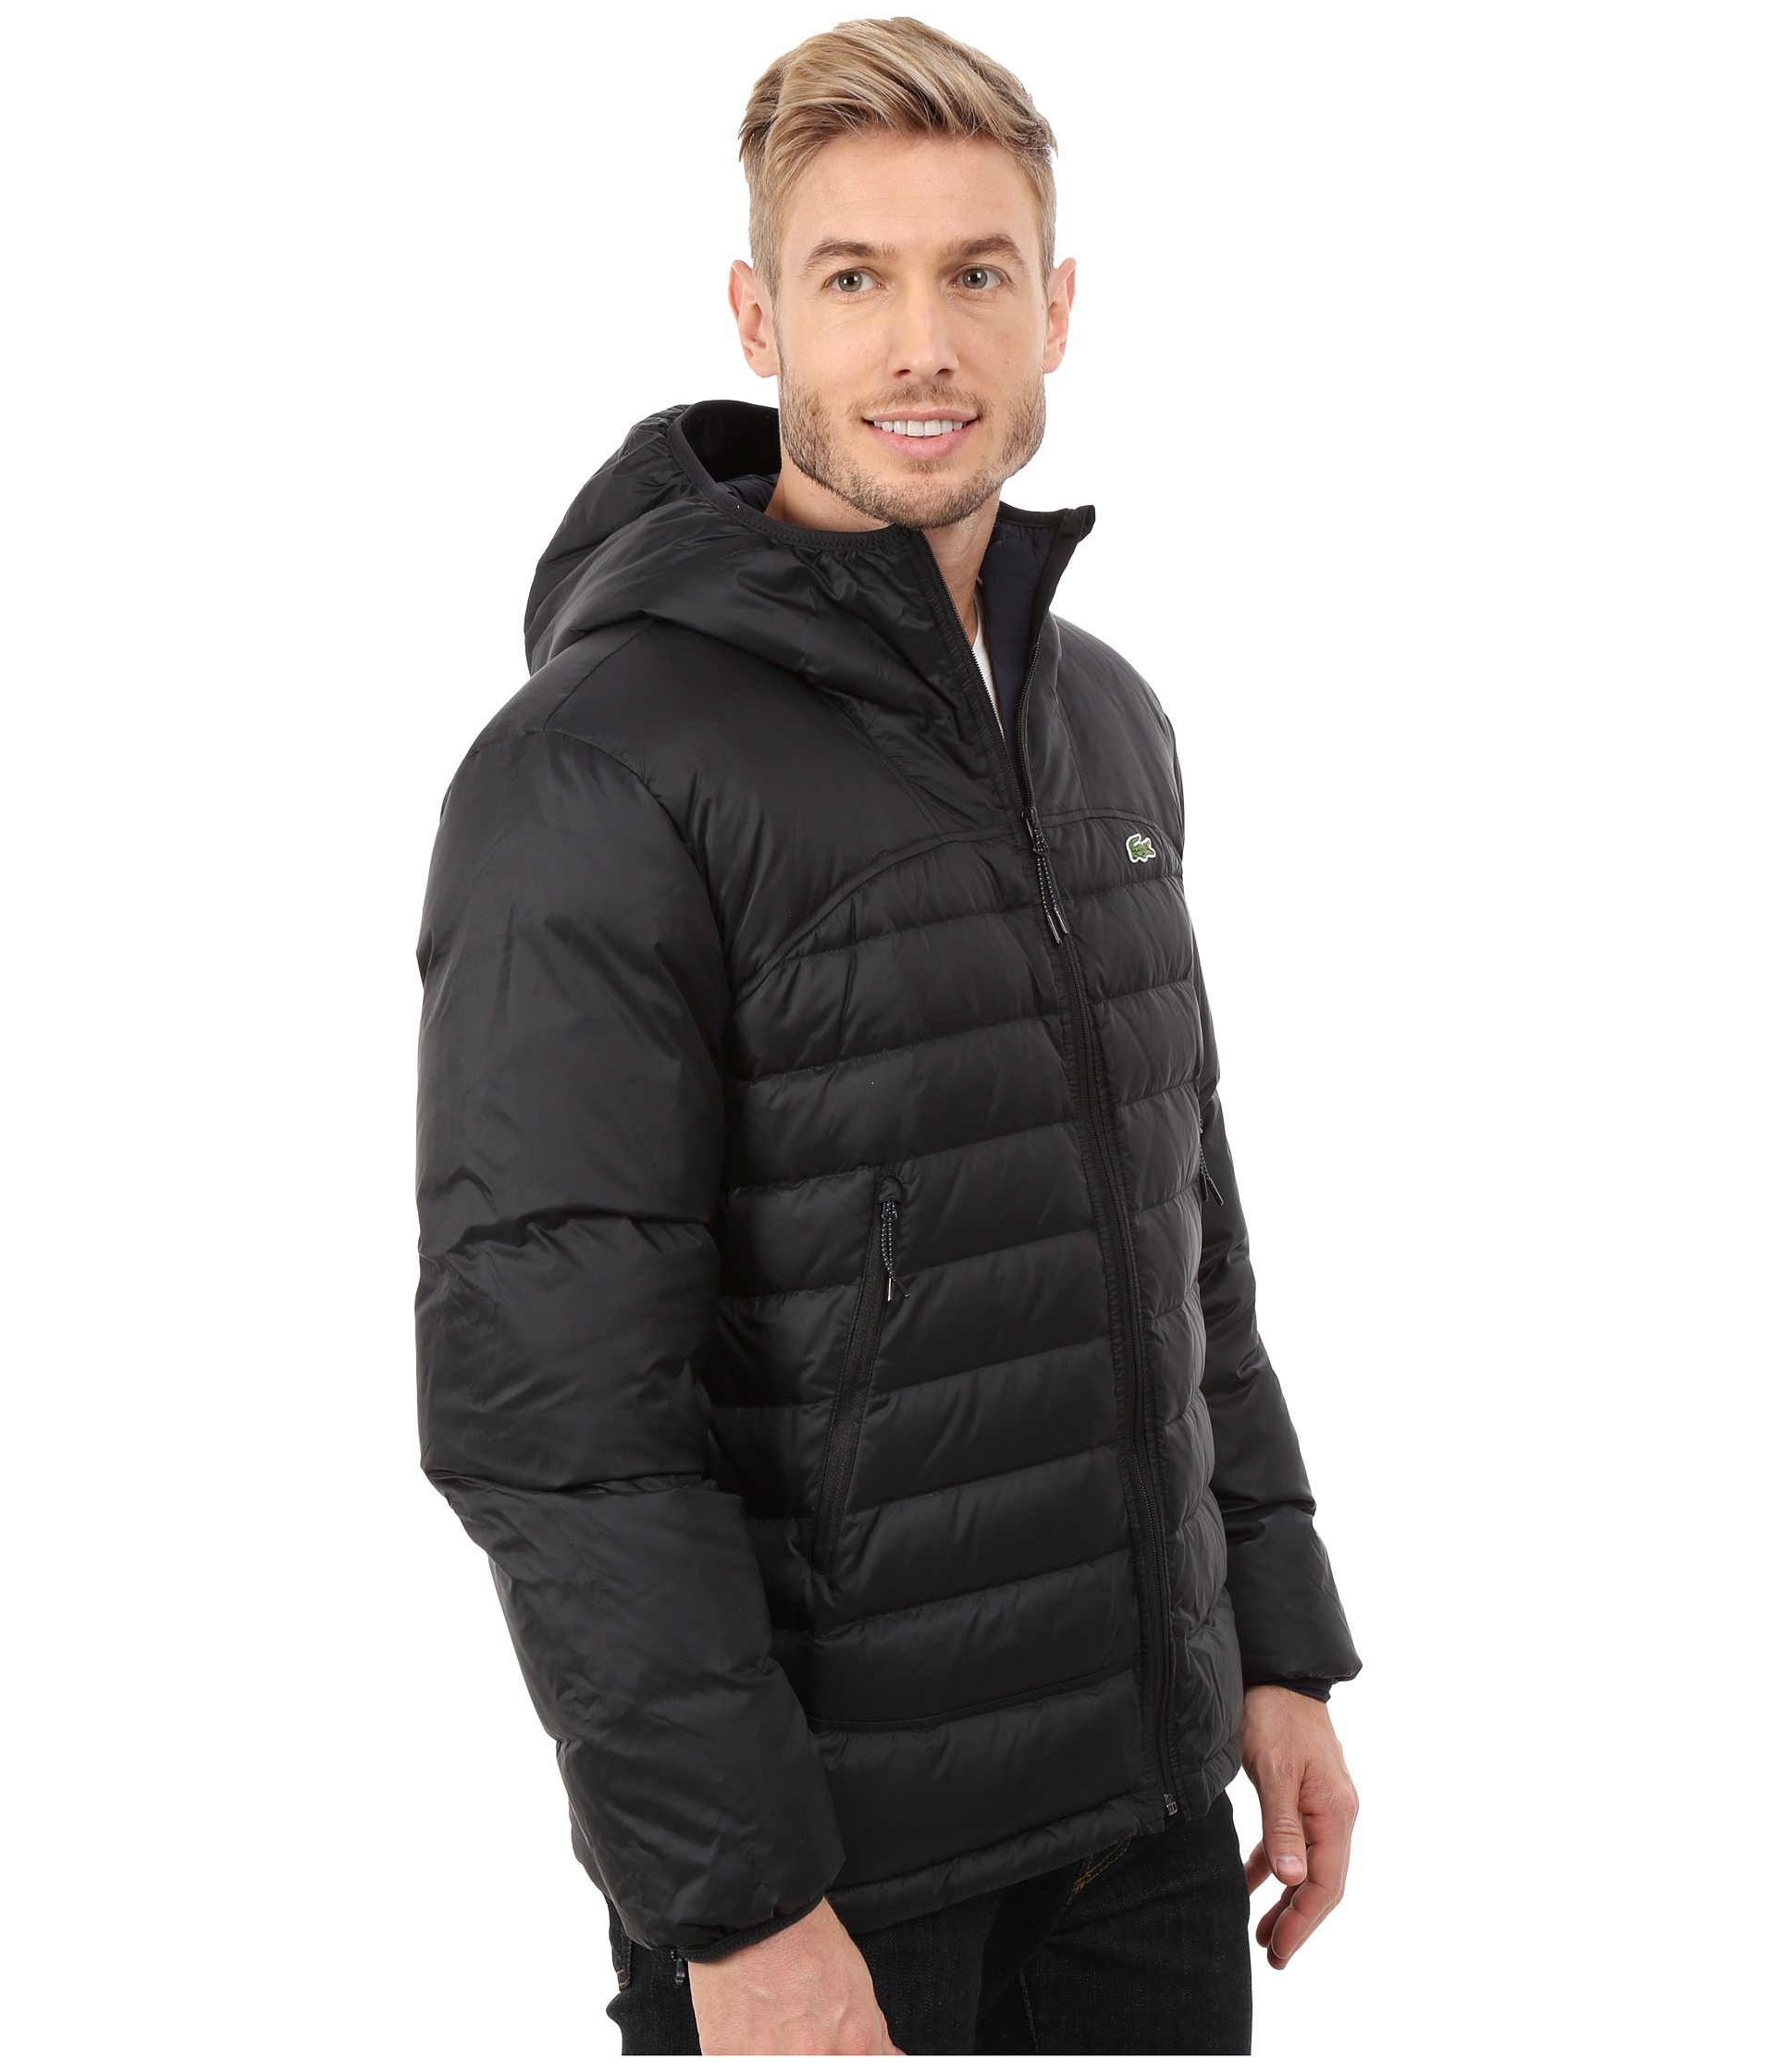 Lacoste Light Weight Packable Down Jacket in Black for Men - Lyst